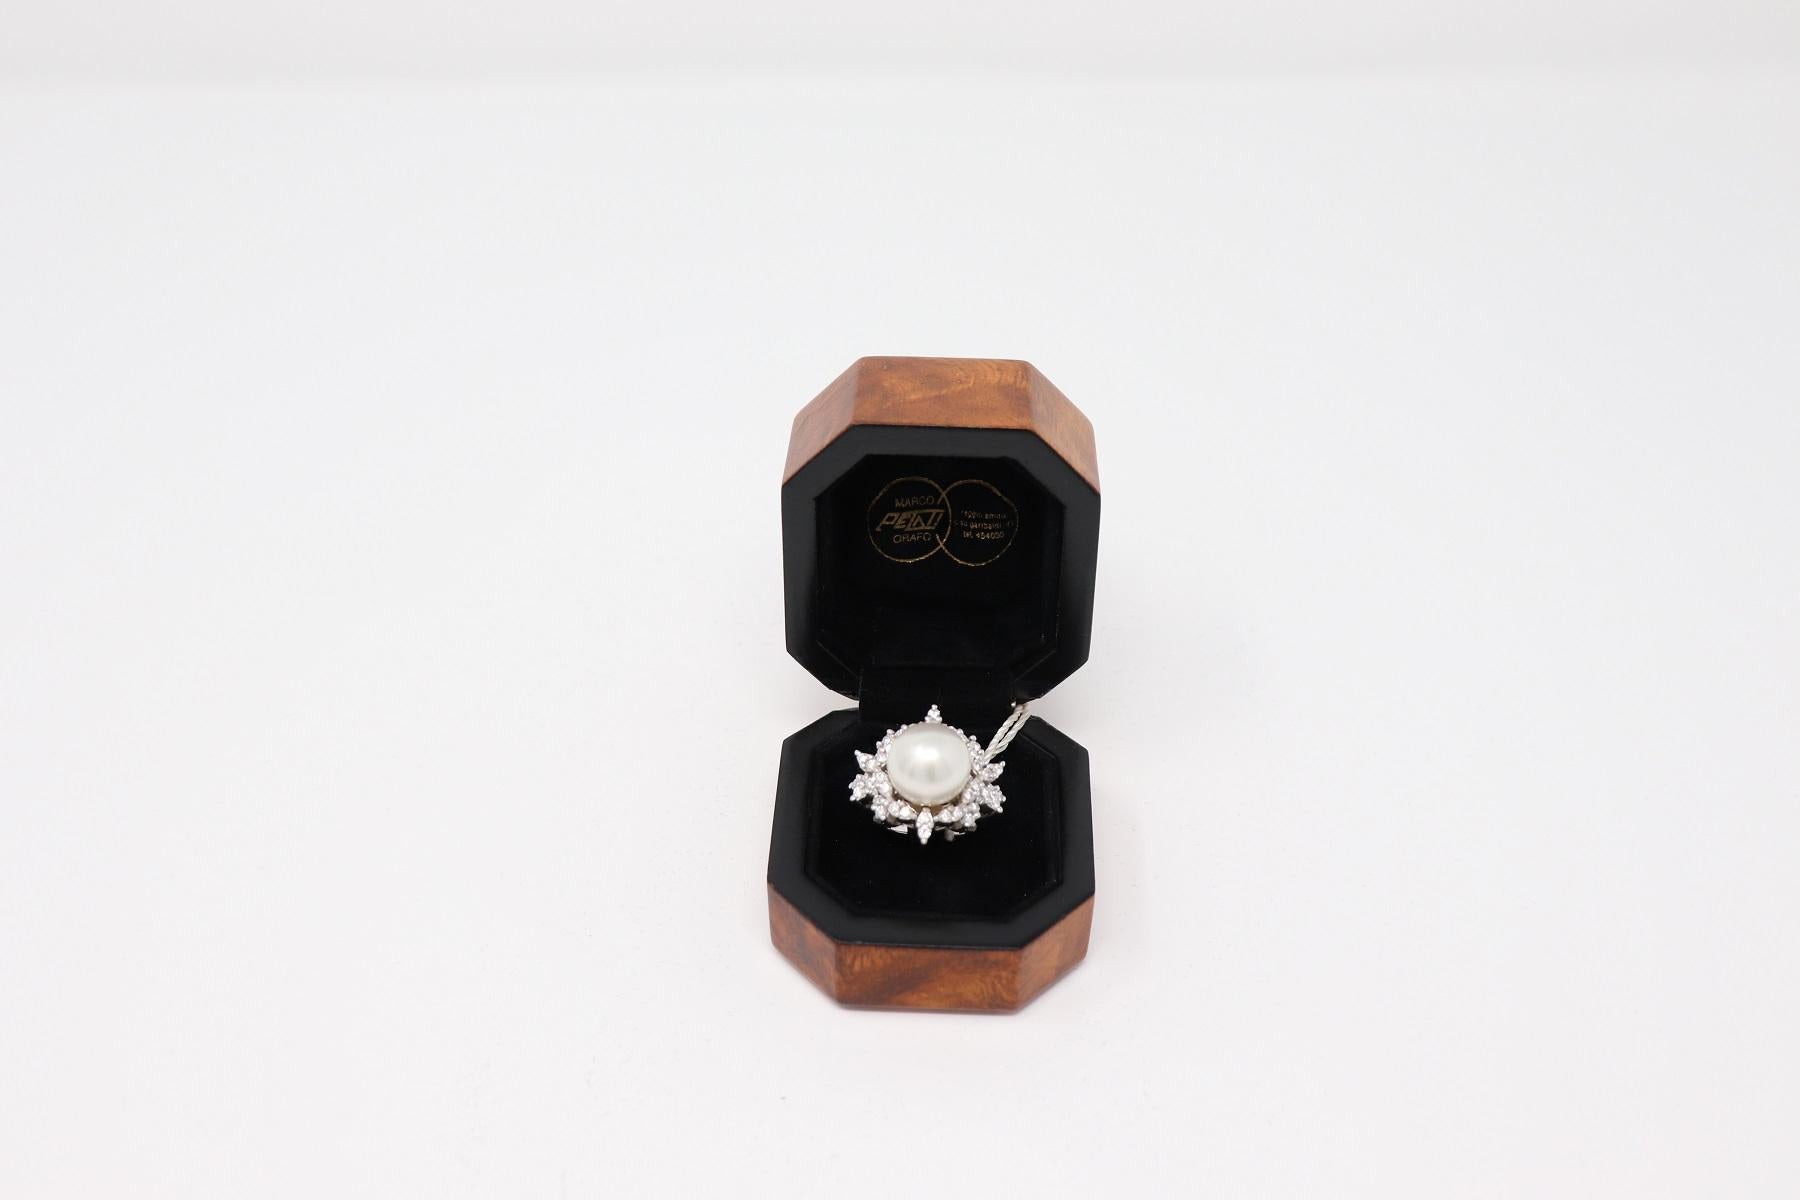 18 Karat white gold ring with large Australian 25 Carat central pearl. The pearl is surrounded by brilliant cut diamonds totaling 1.50 Carat.
Ring size Italian 18 please see the conversion in the table in the picture. This beautiful ring of Italian